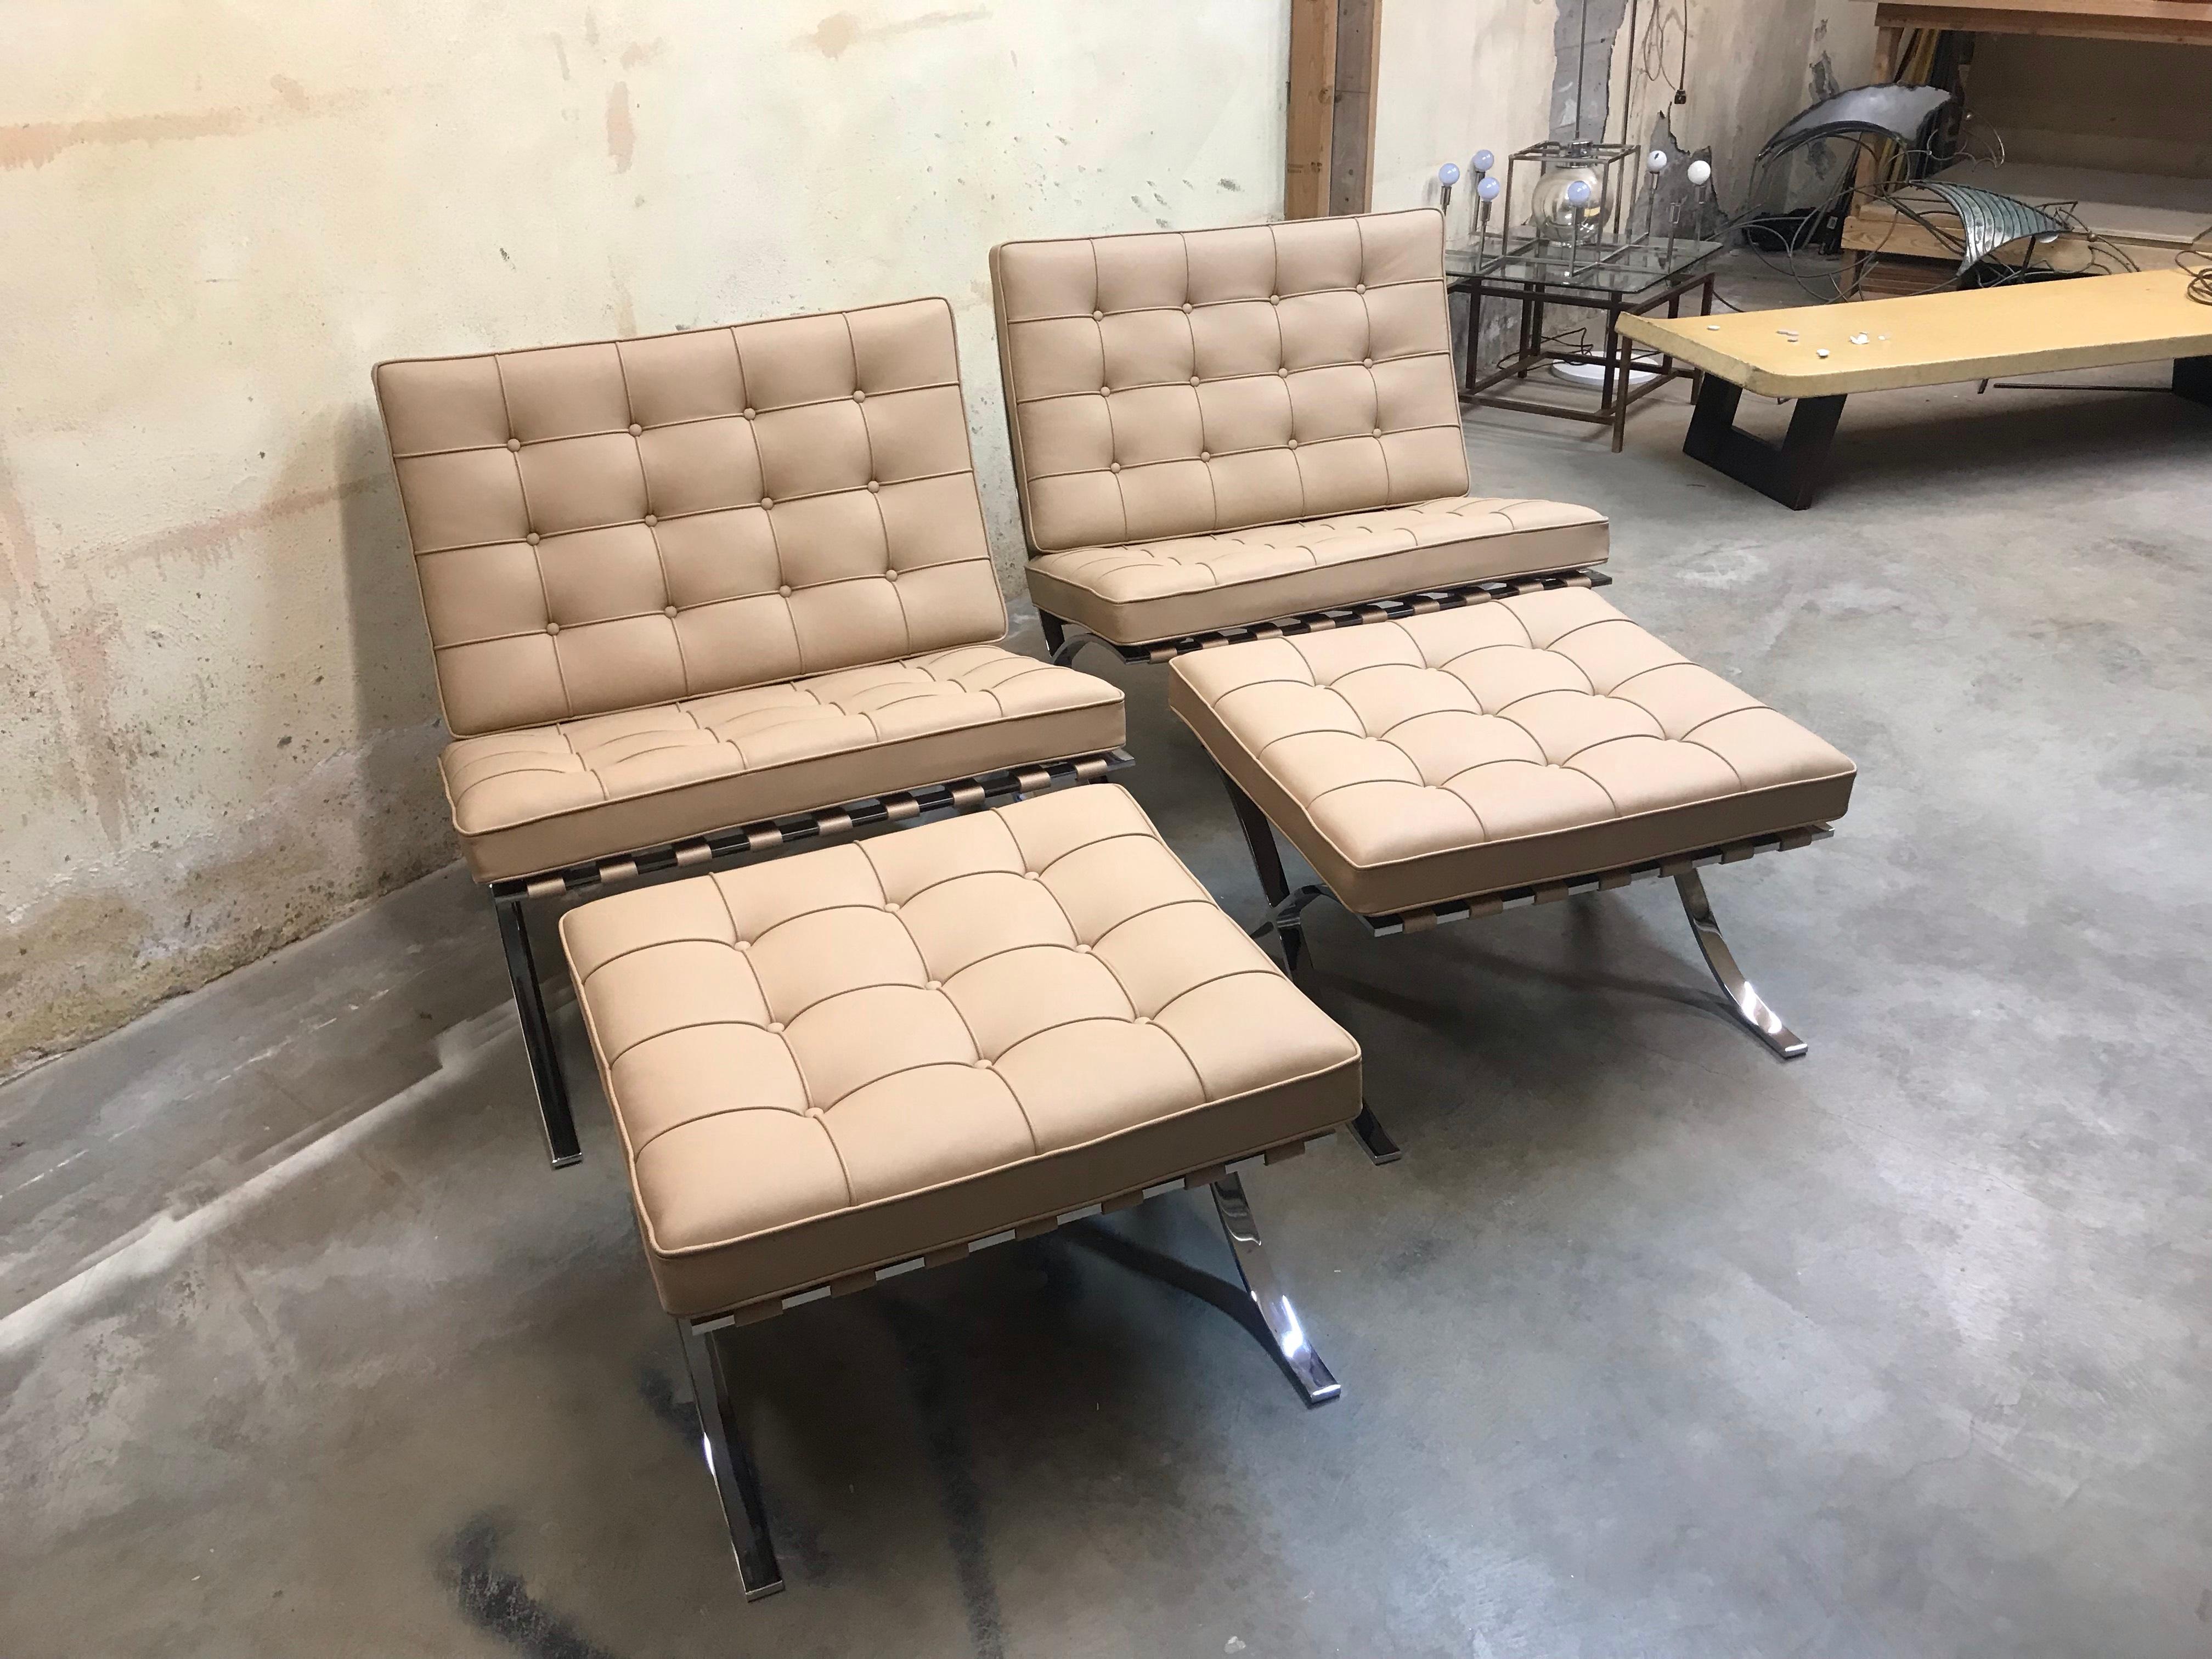 From the Beaver Creek Colorado Estate of Steve Fossett an American businessman and a record-setting aviator, sailor, and adventurer. These Barcelona chairs and ottomans are in excellent condition and they do not have any issues.

This iconic modern